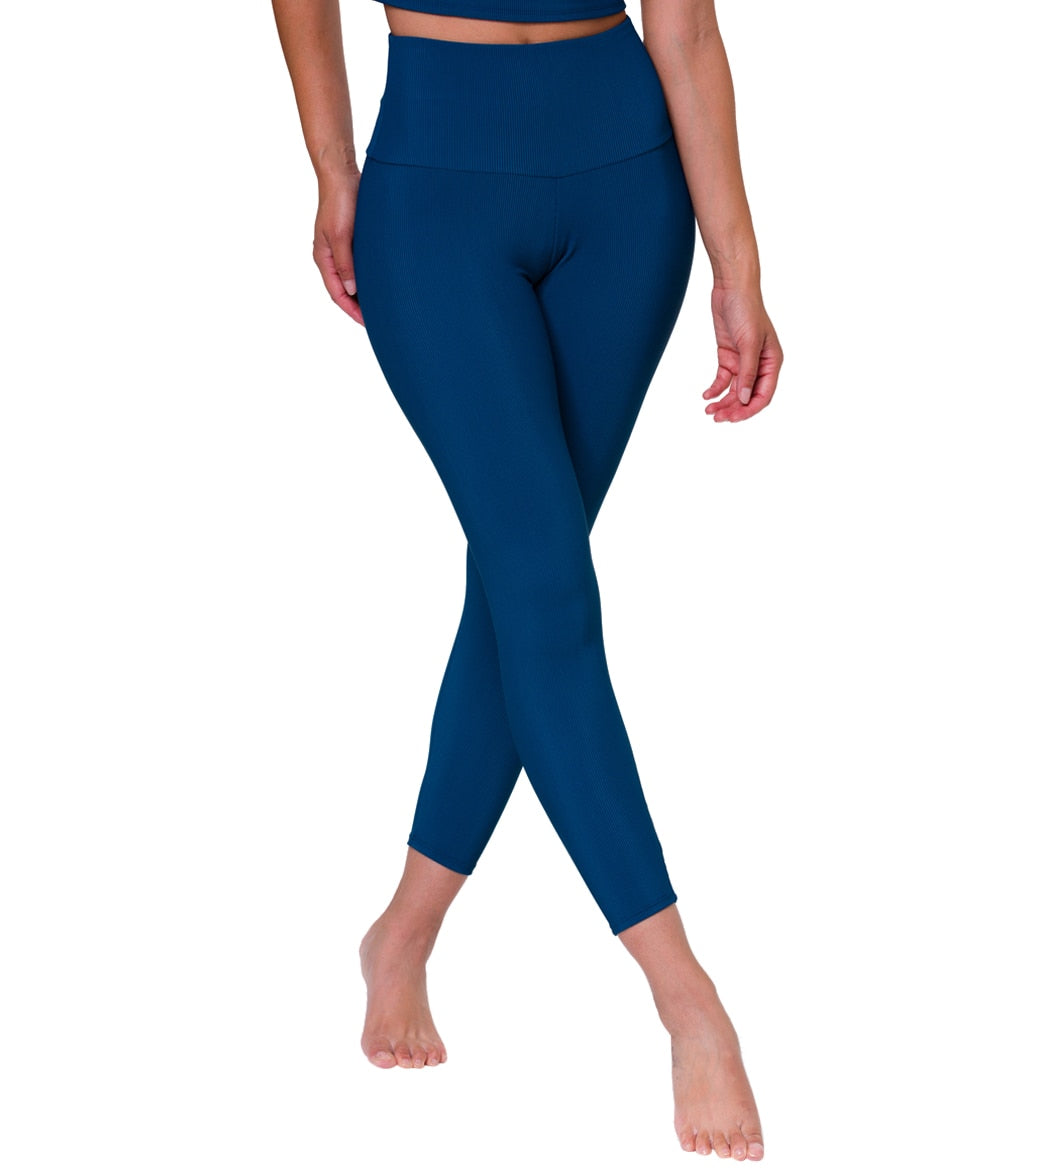 Plus Size Thick Full Length Leggings and Free Size ( M L XL 2XL 3XL 4XL ) |  Shopee Philippines